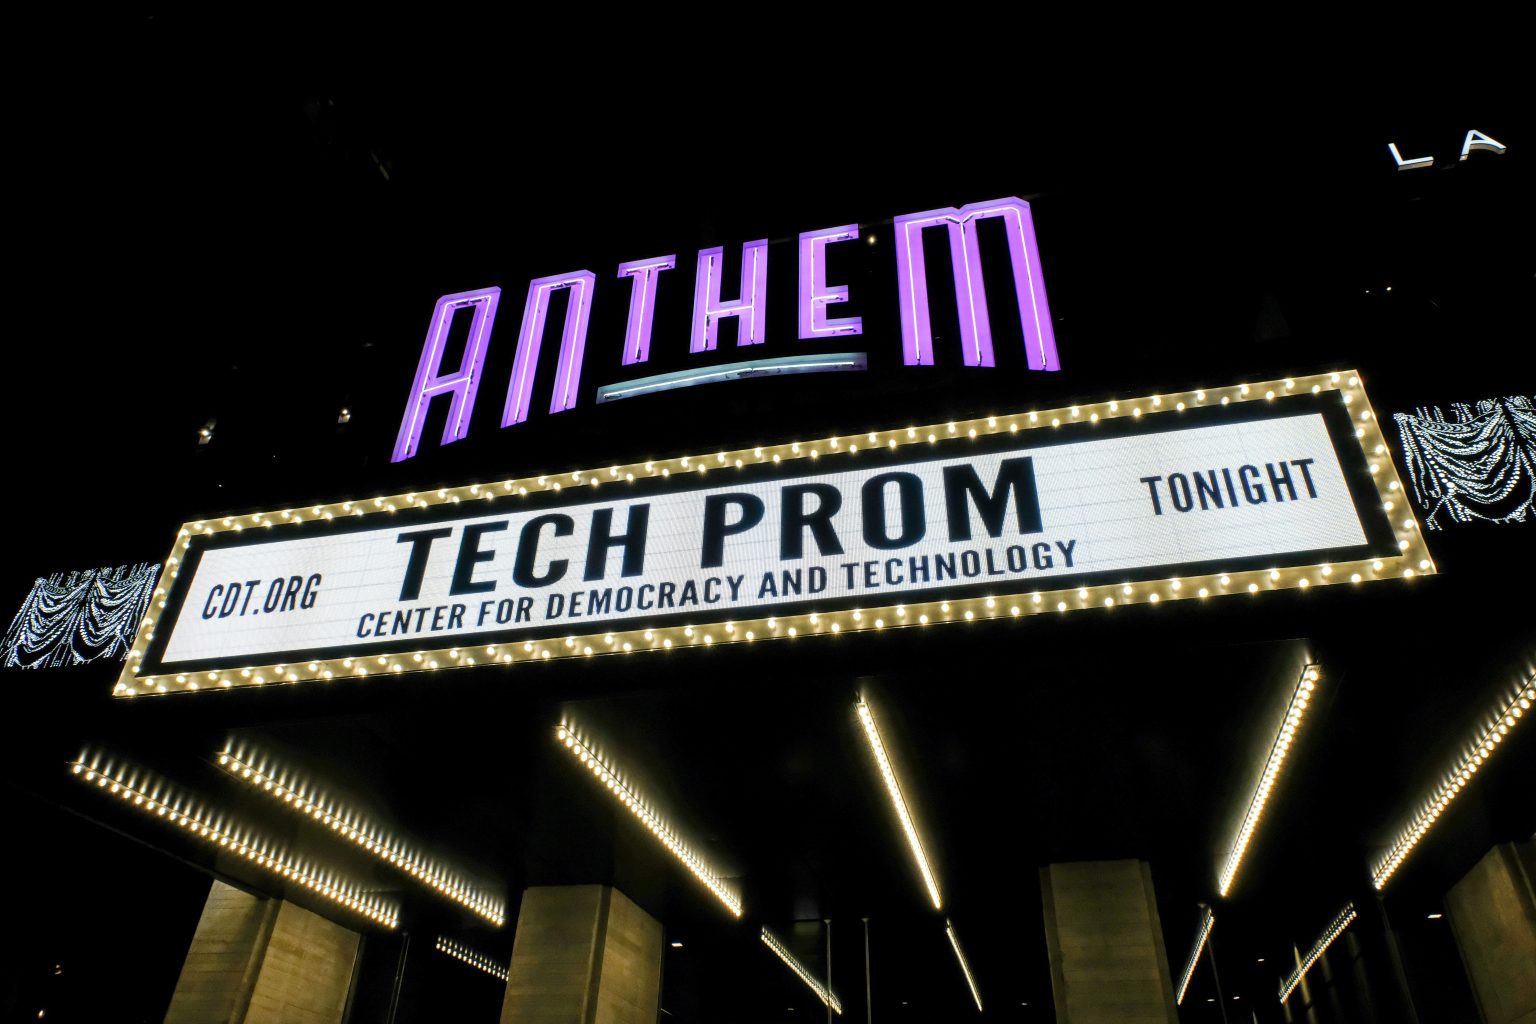 Tech Prom 2020 Center for Democracy and Technology